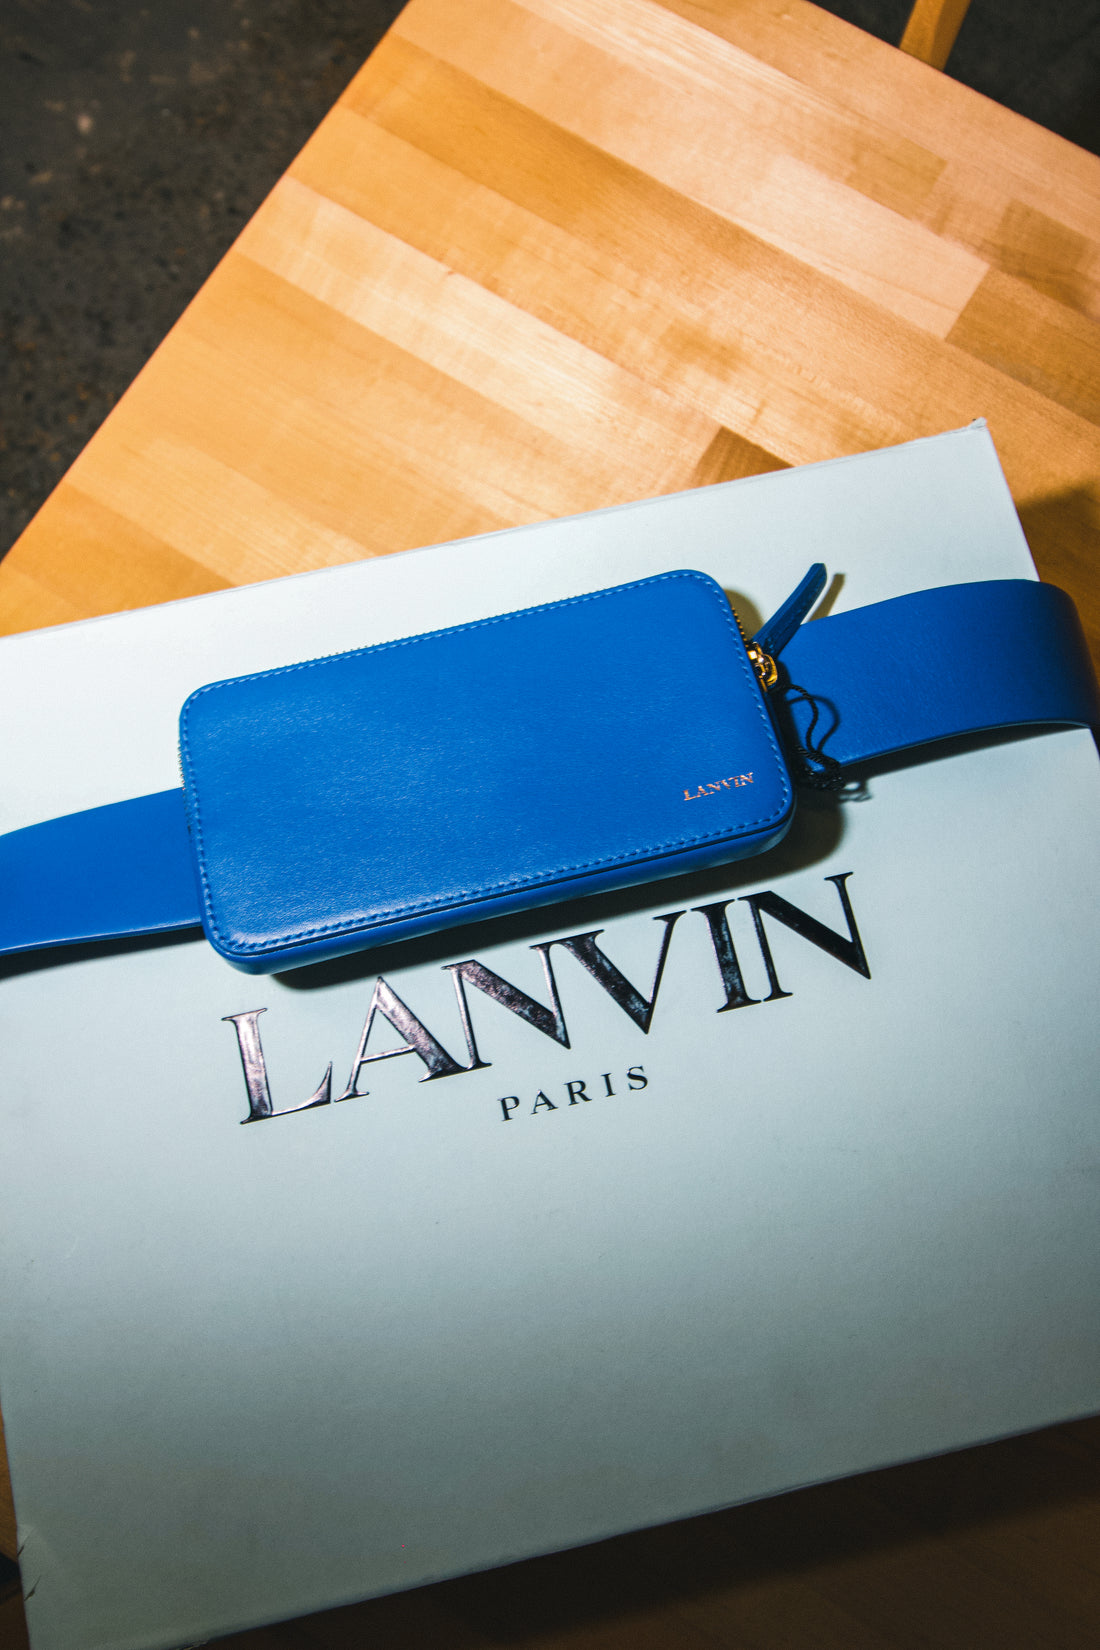 Colorful Elegance: Lanvin's Artistic Mastery of Hues